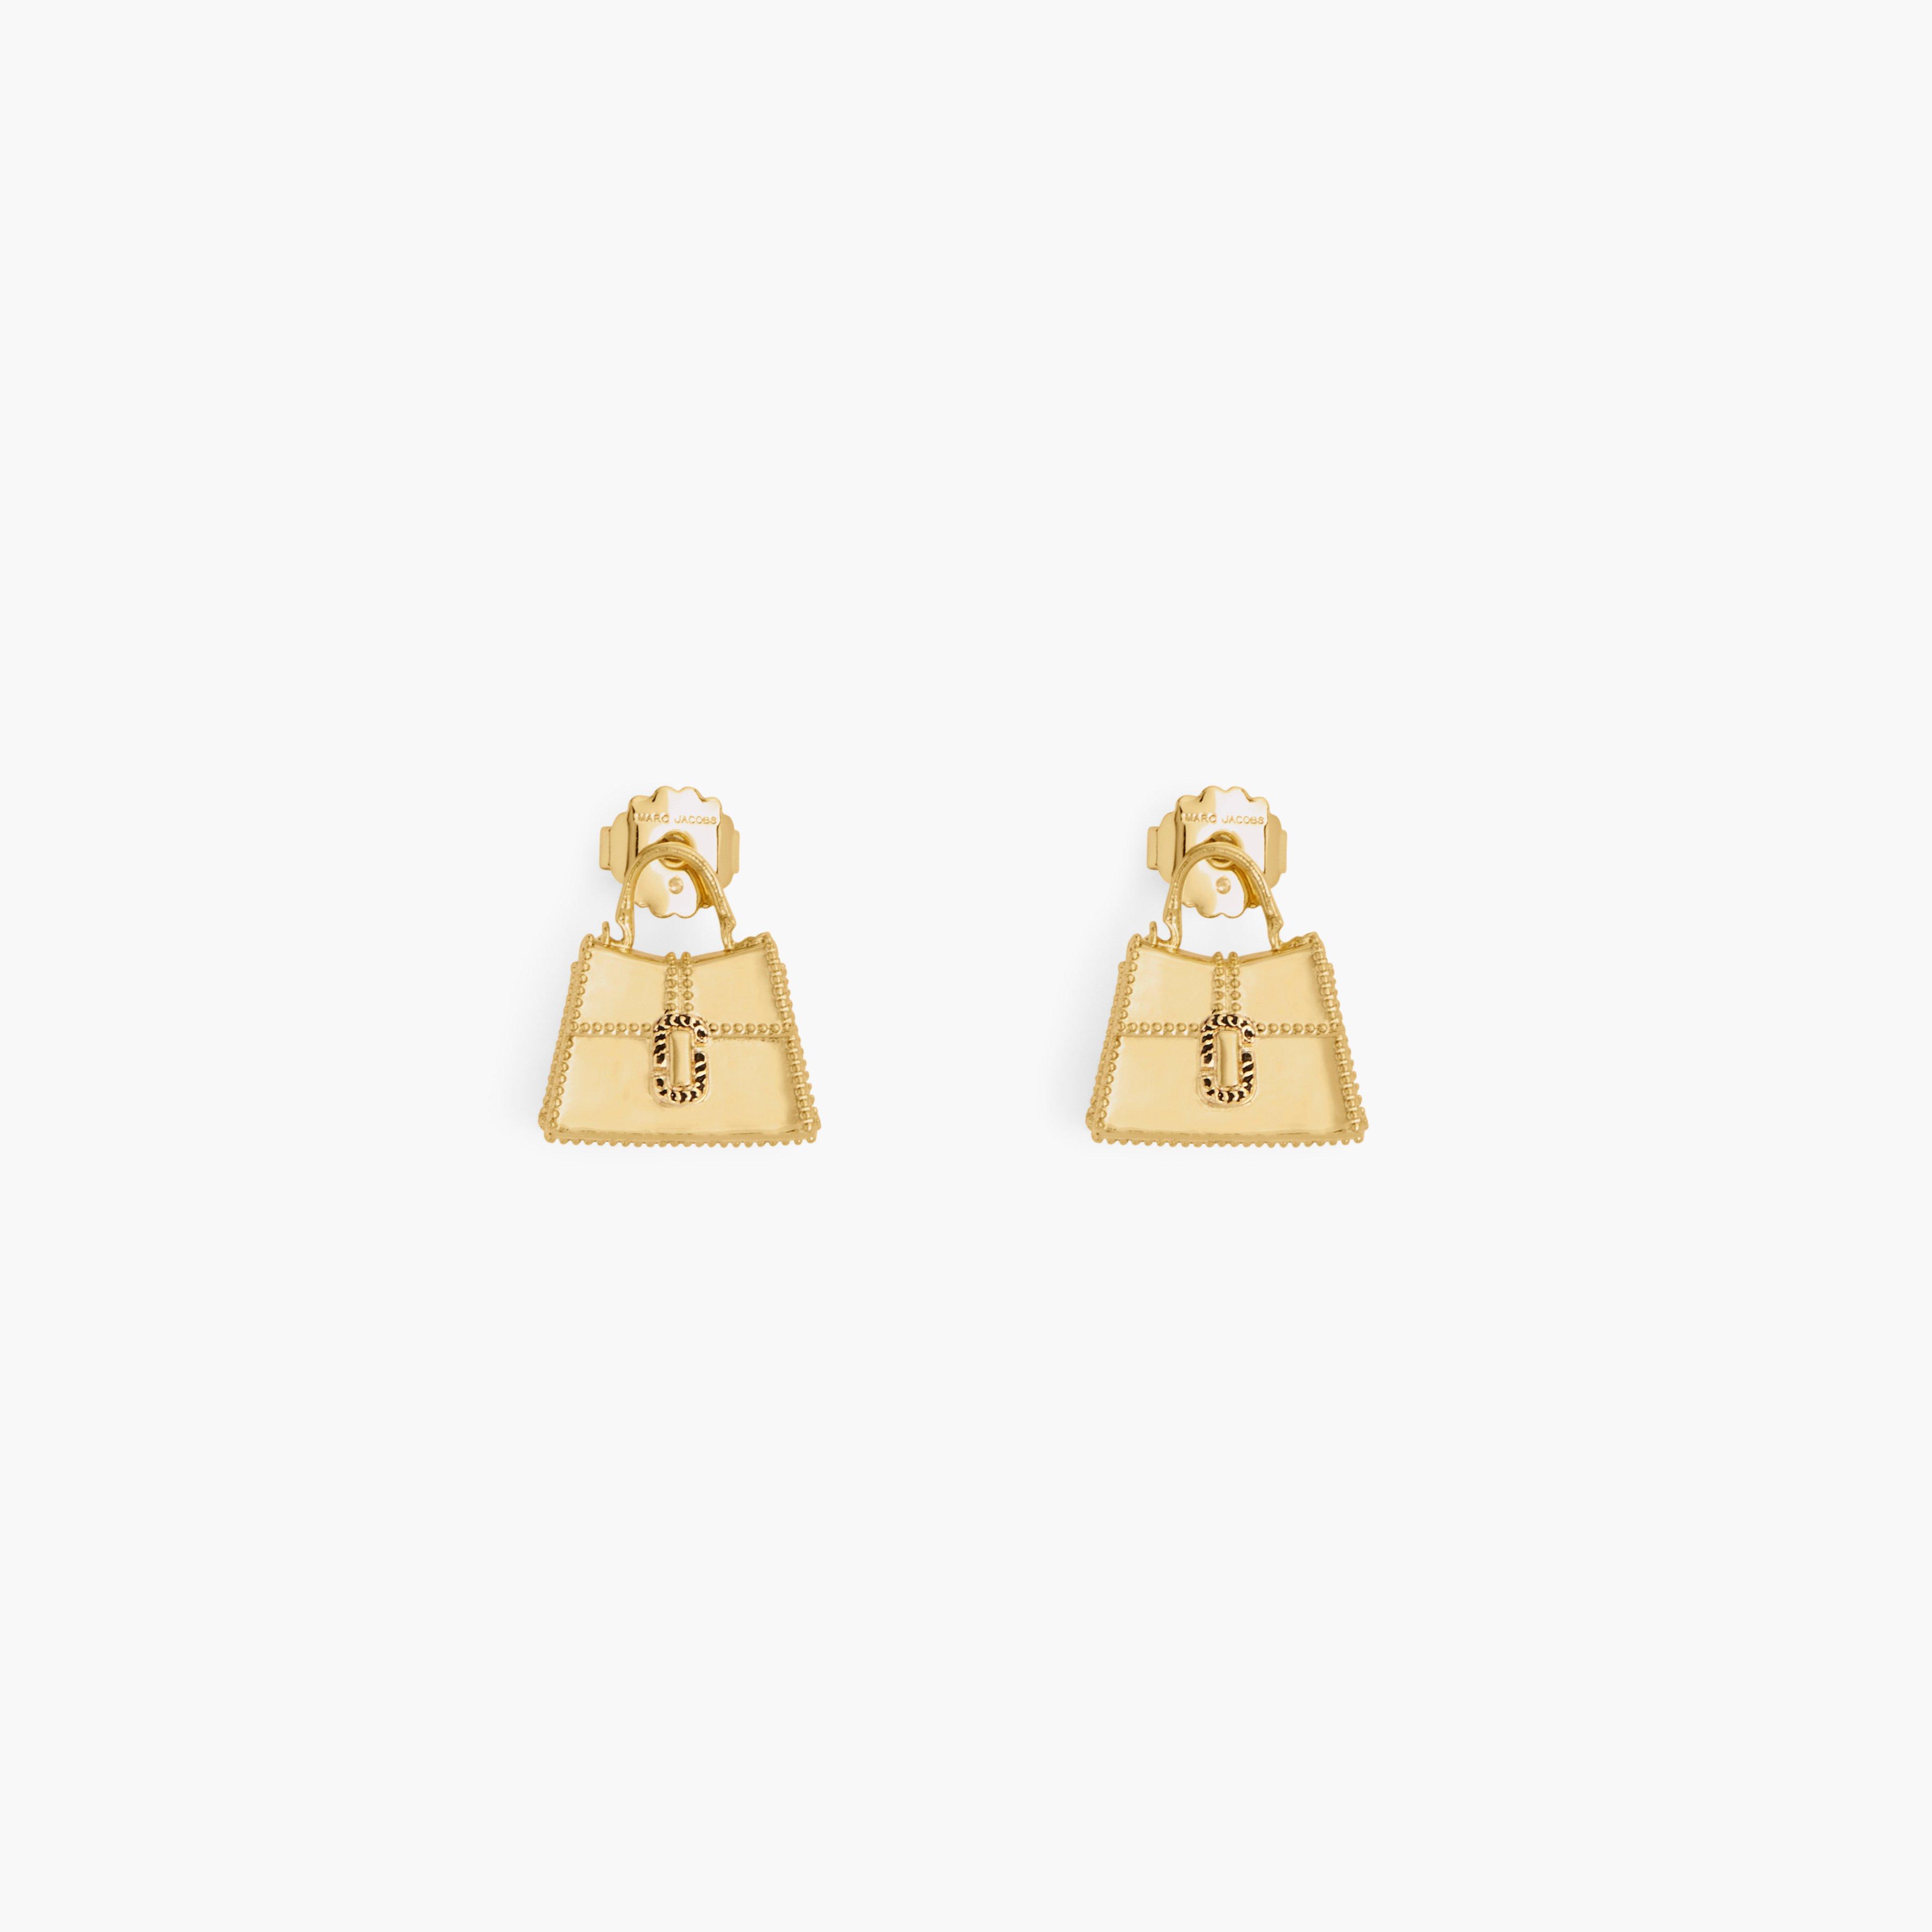 Marc by Marc jacobs The St. Marc Earrings,LIGHT ANTIQUE GOLD